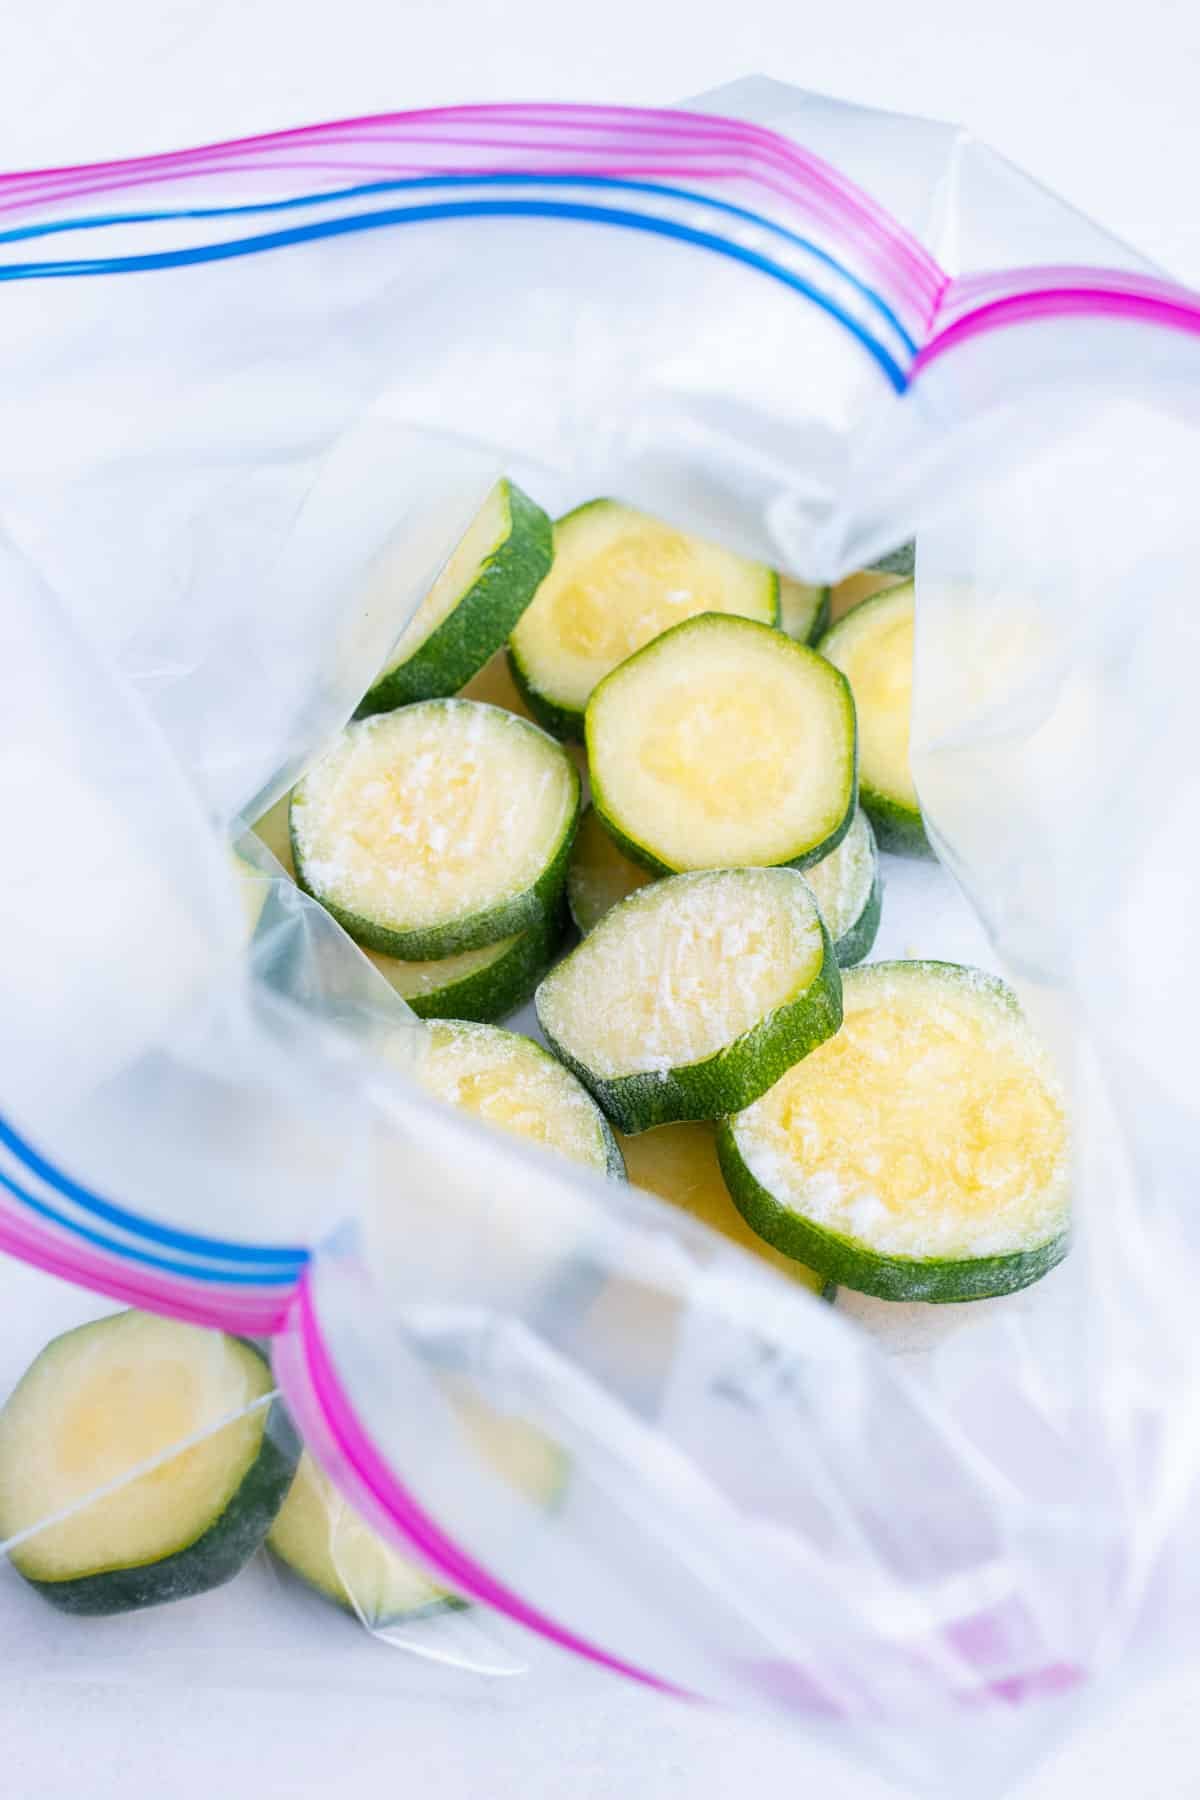 Sliced zucchini is placed into a freezer ziplock bag for keeping in the freezer for future recipes.